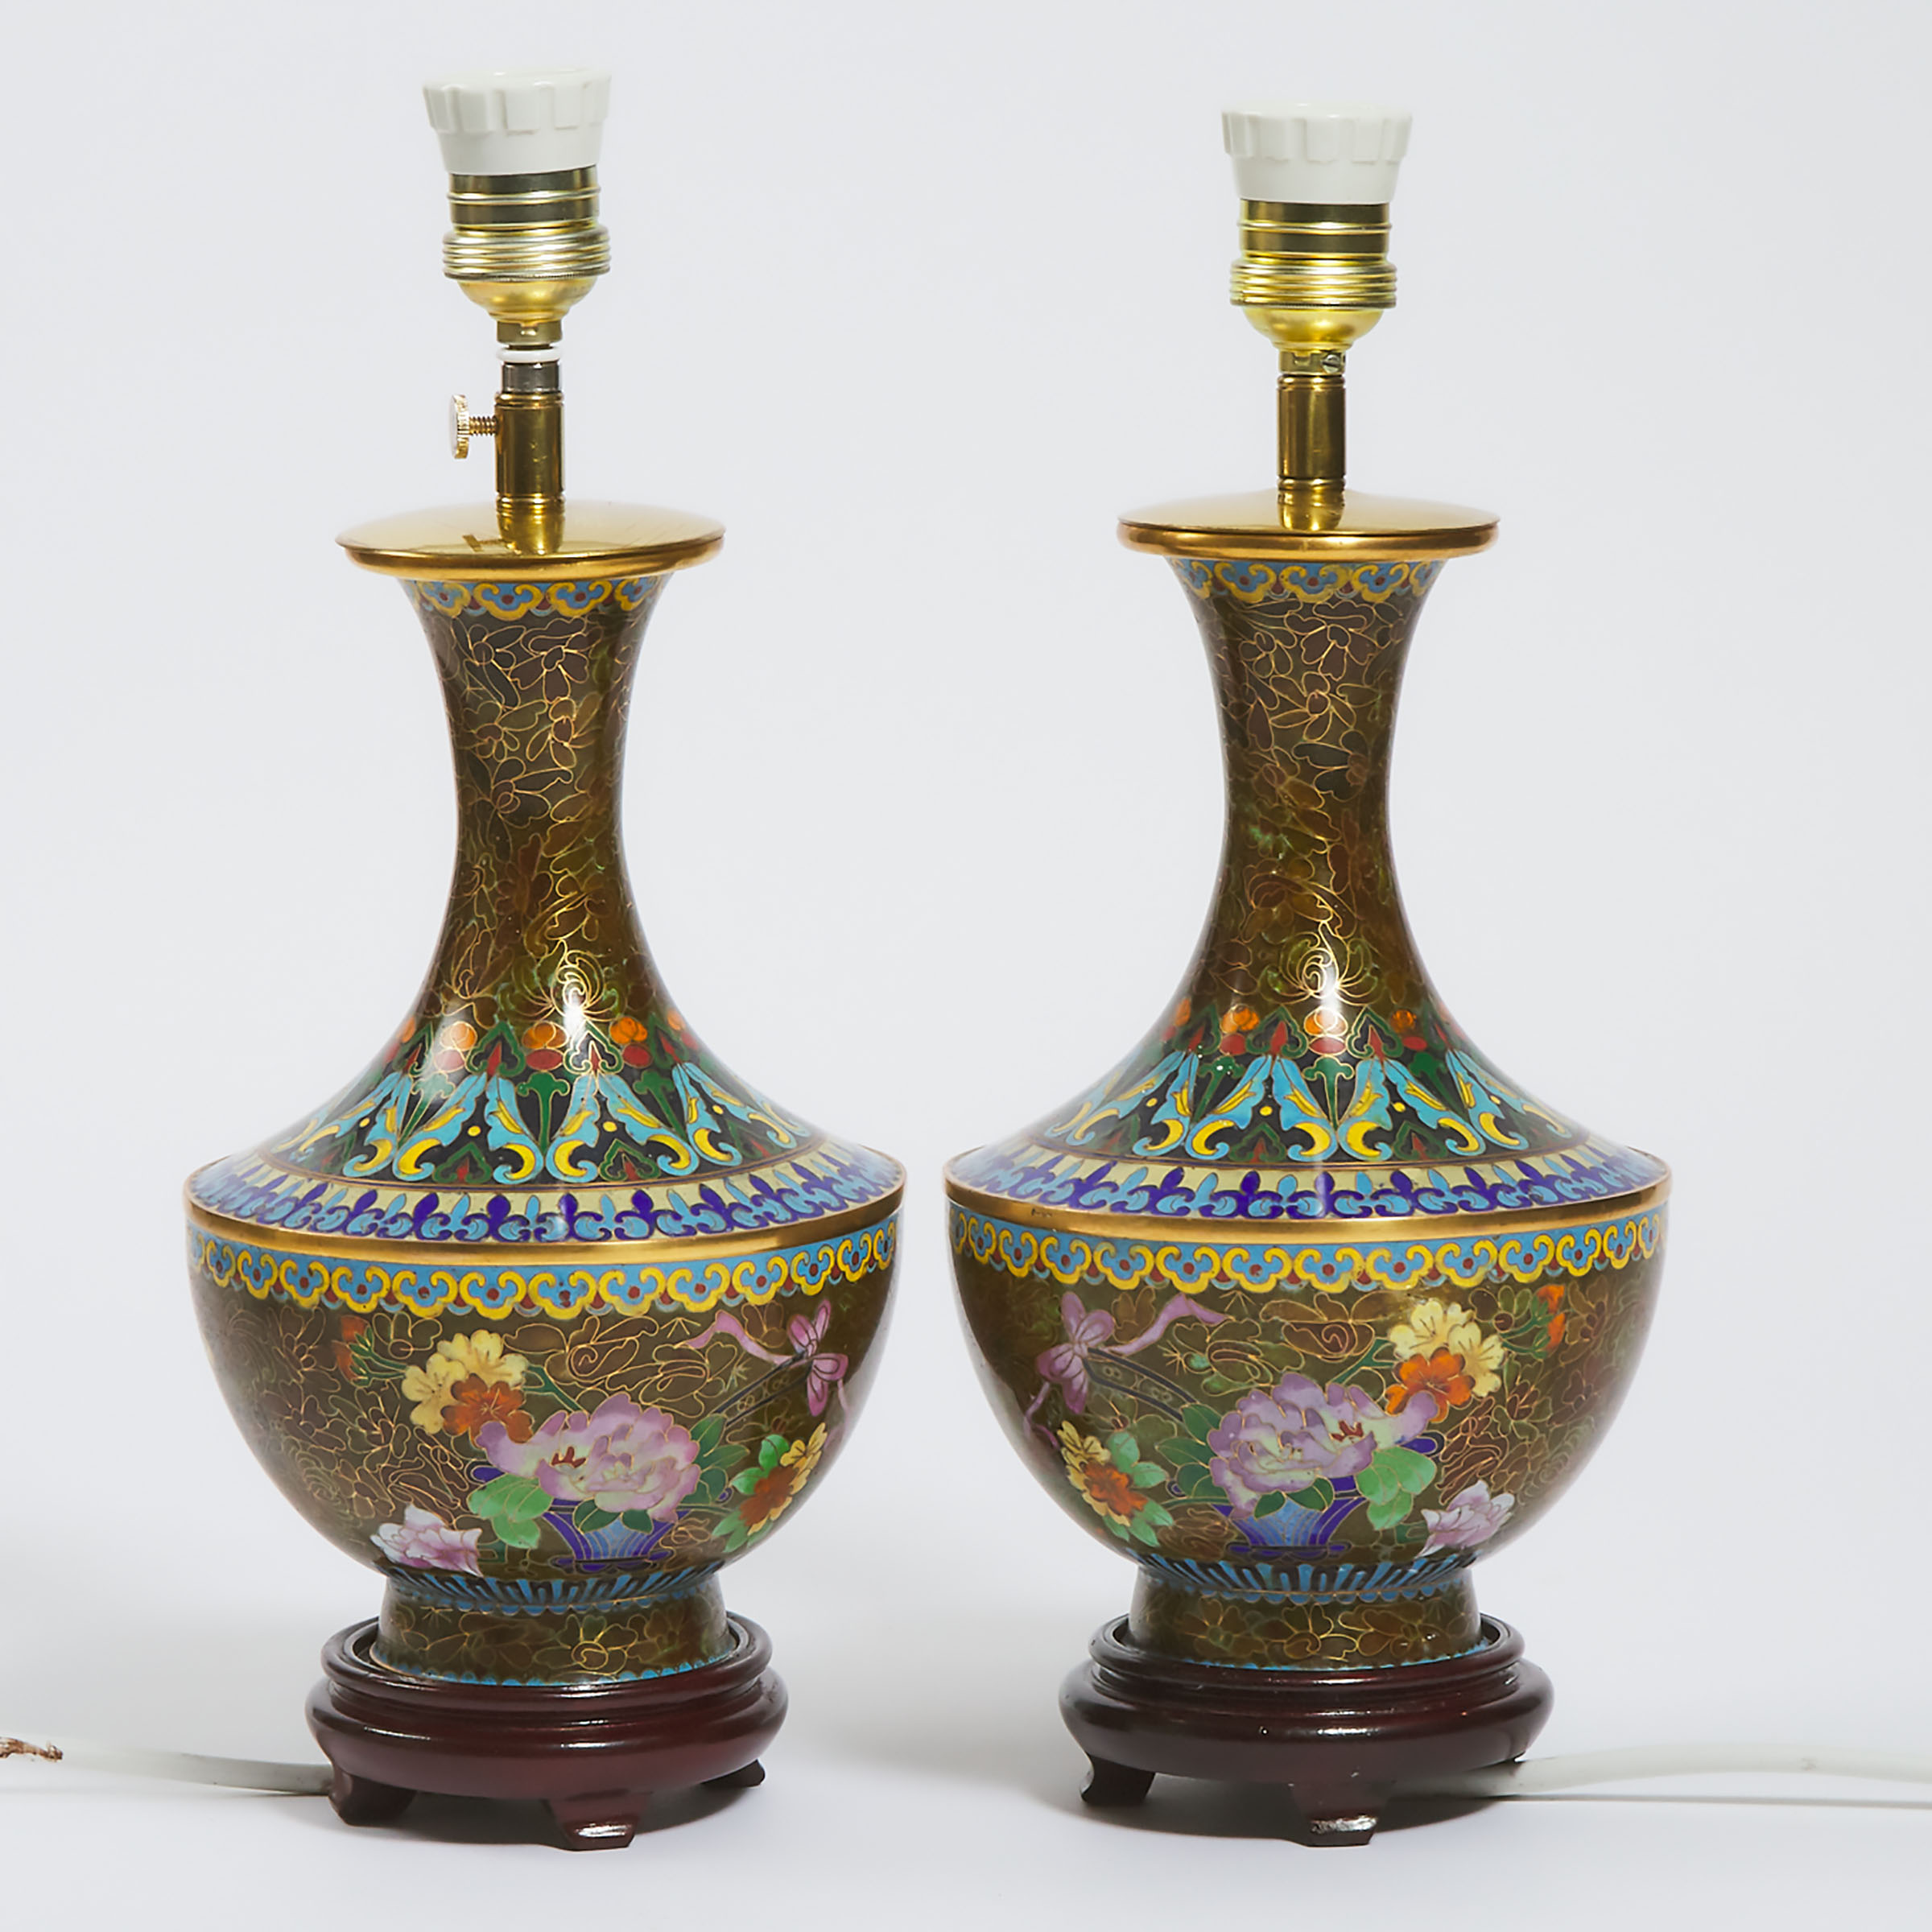 A Pair of Chinese Cloisonné Vase Lamps, Early 20th Century